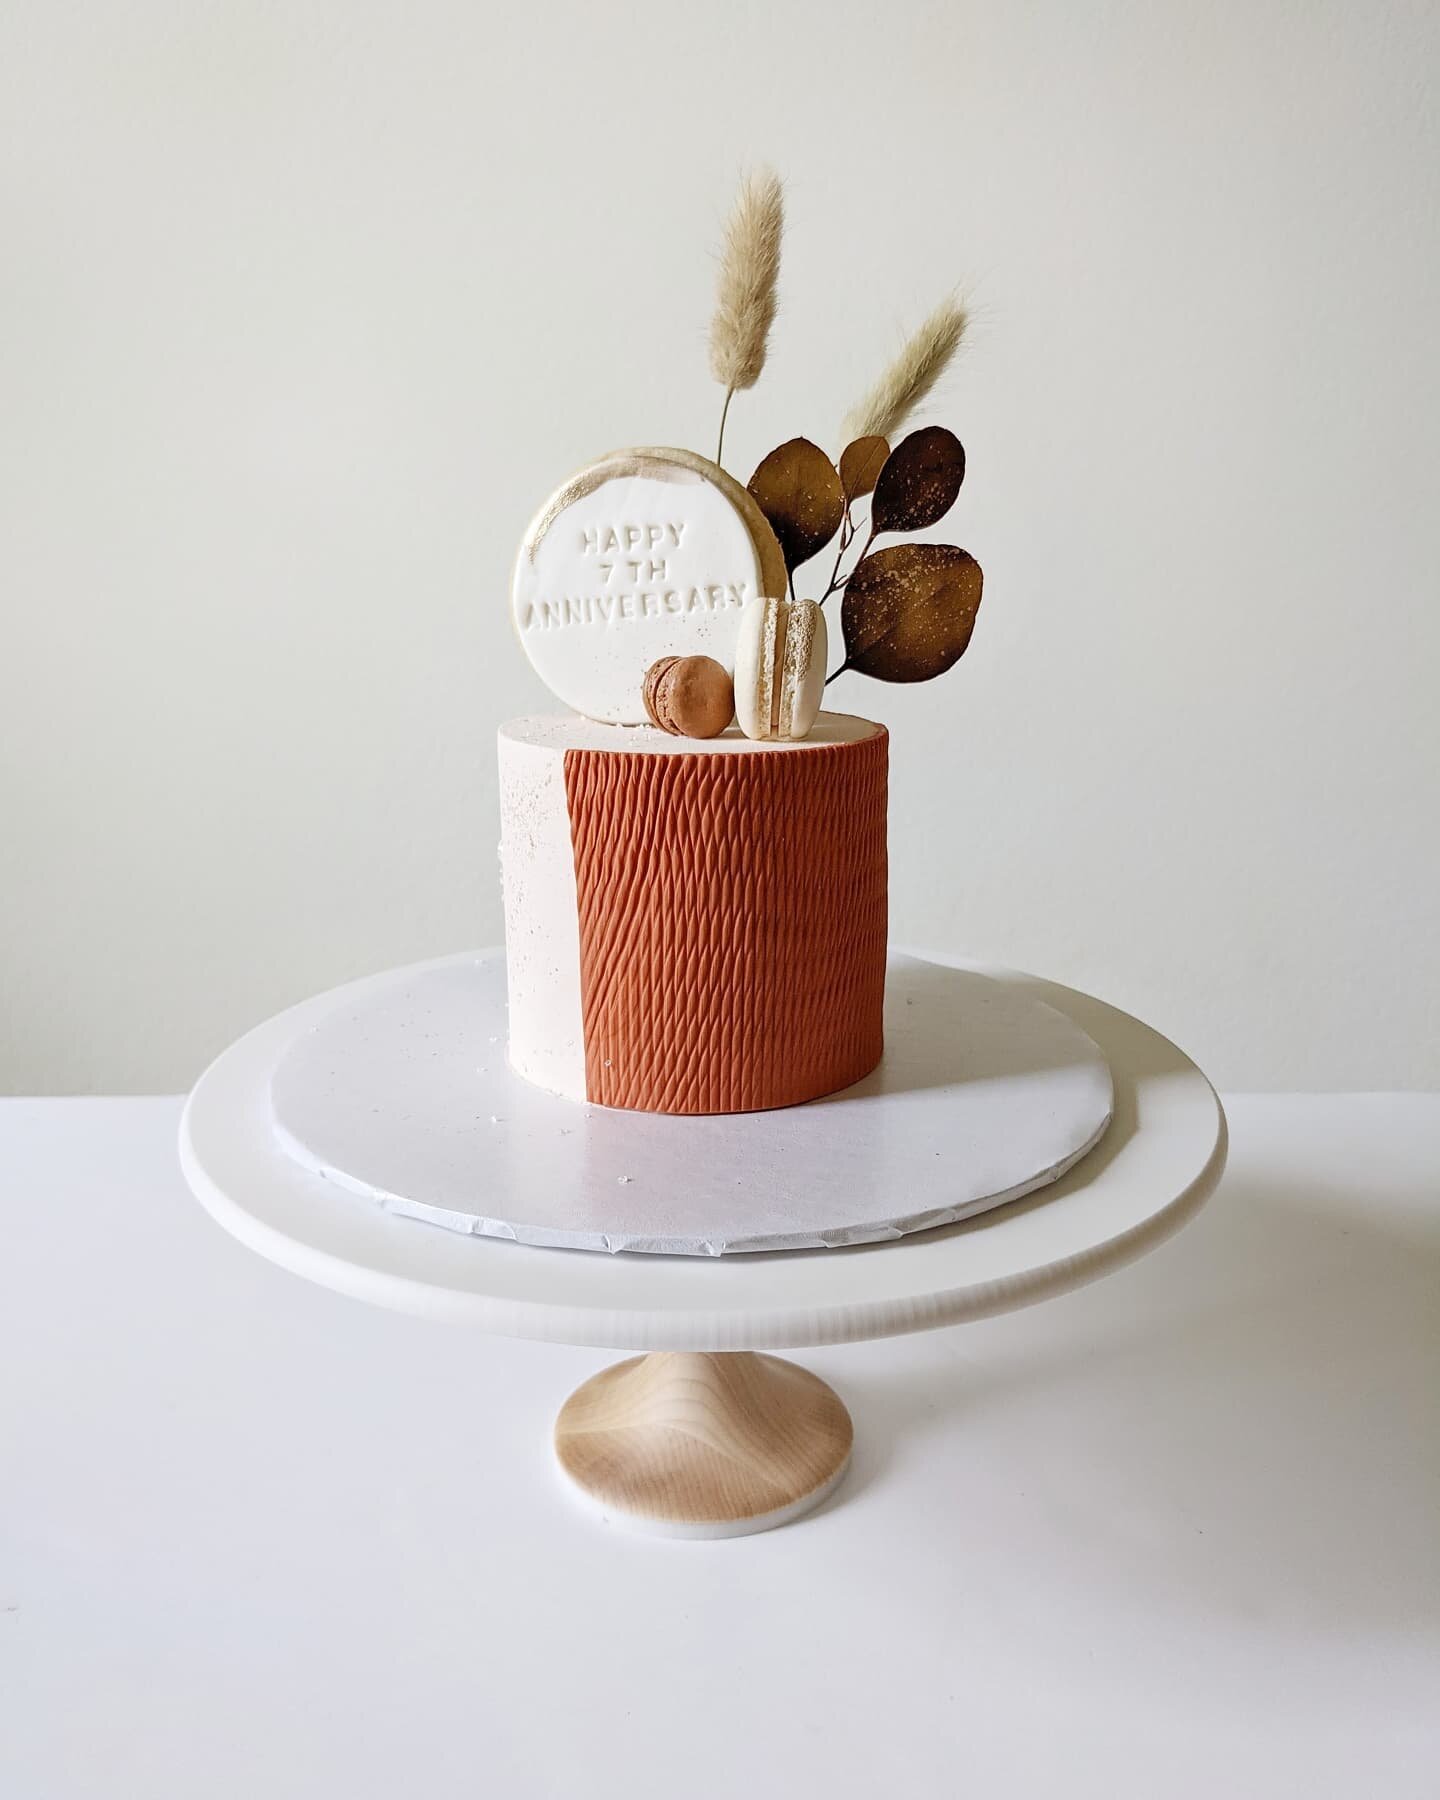 Minimalist Mini⁣⁣
⁣
⁣
It's a rainy morning here and I'll be baking for the rest of my month today. I love warm, summer rain. ⁣But this cake sure makes me ready for my favorite season. 🍂
⁣⁣
⁣⁣
For inquiries, please text.⁣⁣
⁣⁣
214.471.5337⁣⁣
⁣⁣
⁣⁣
Sar